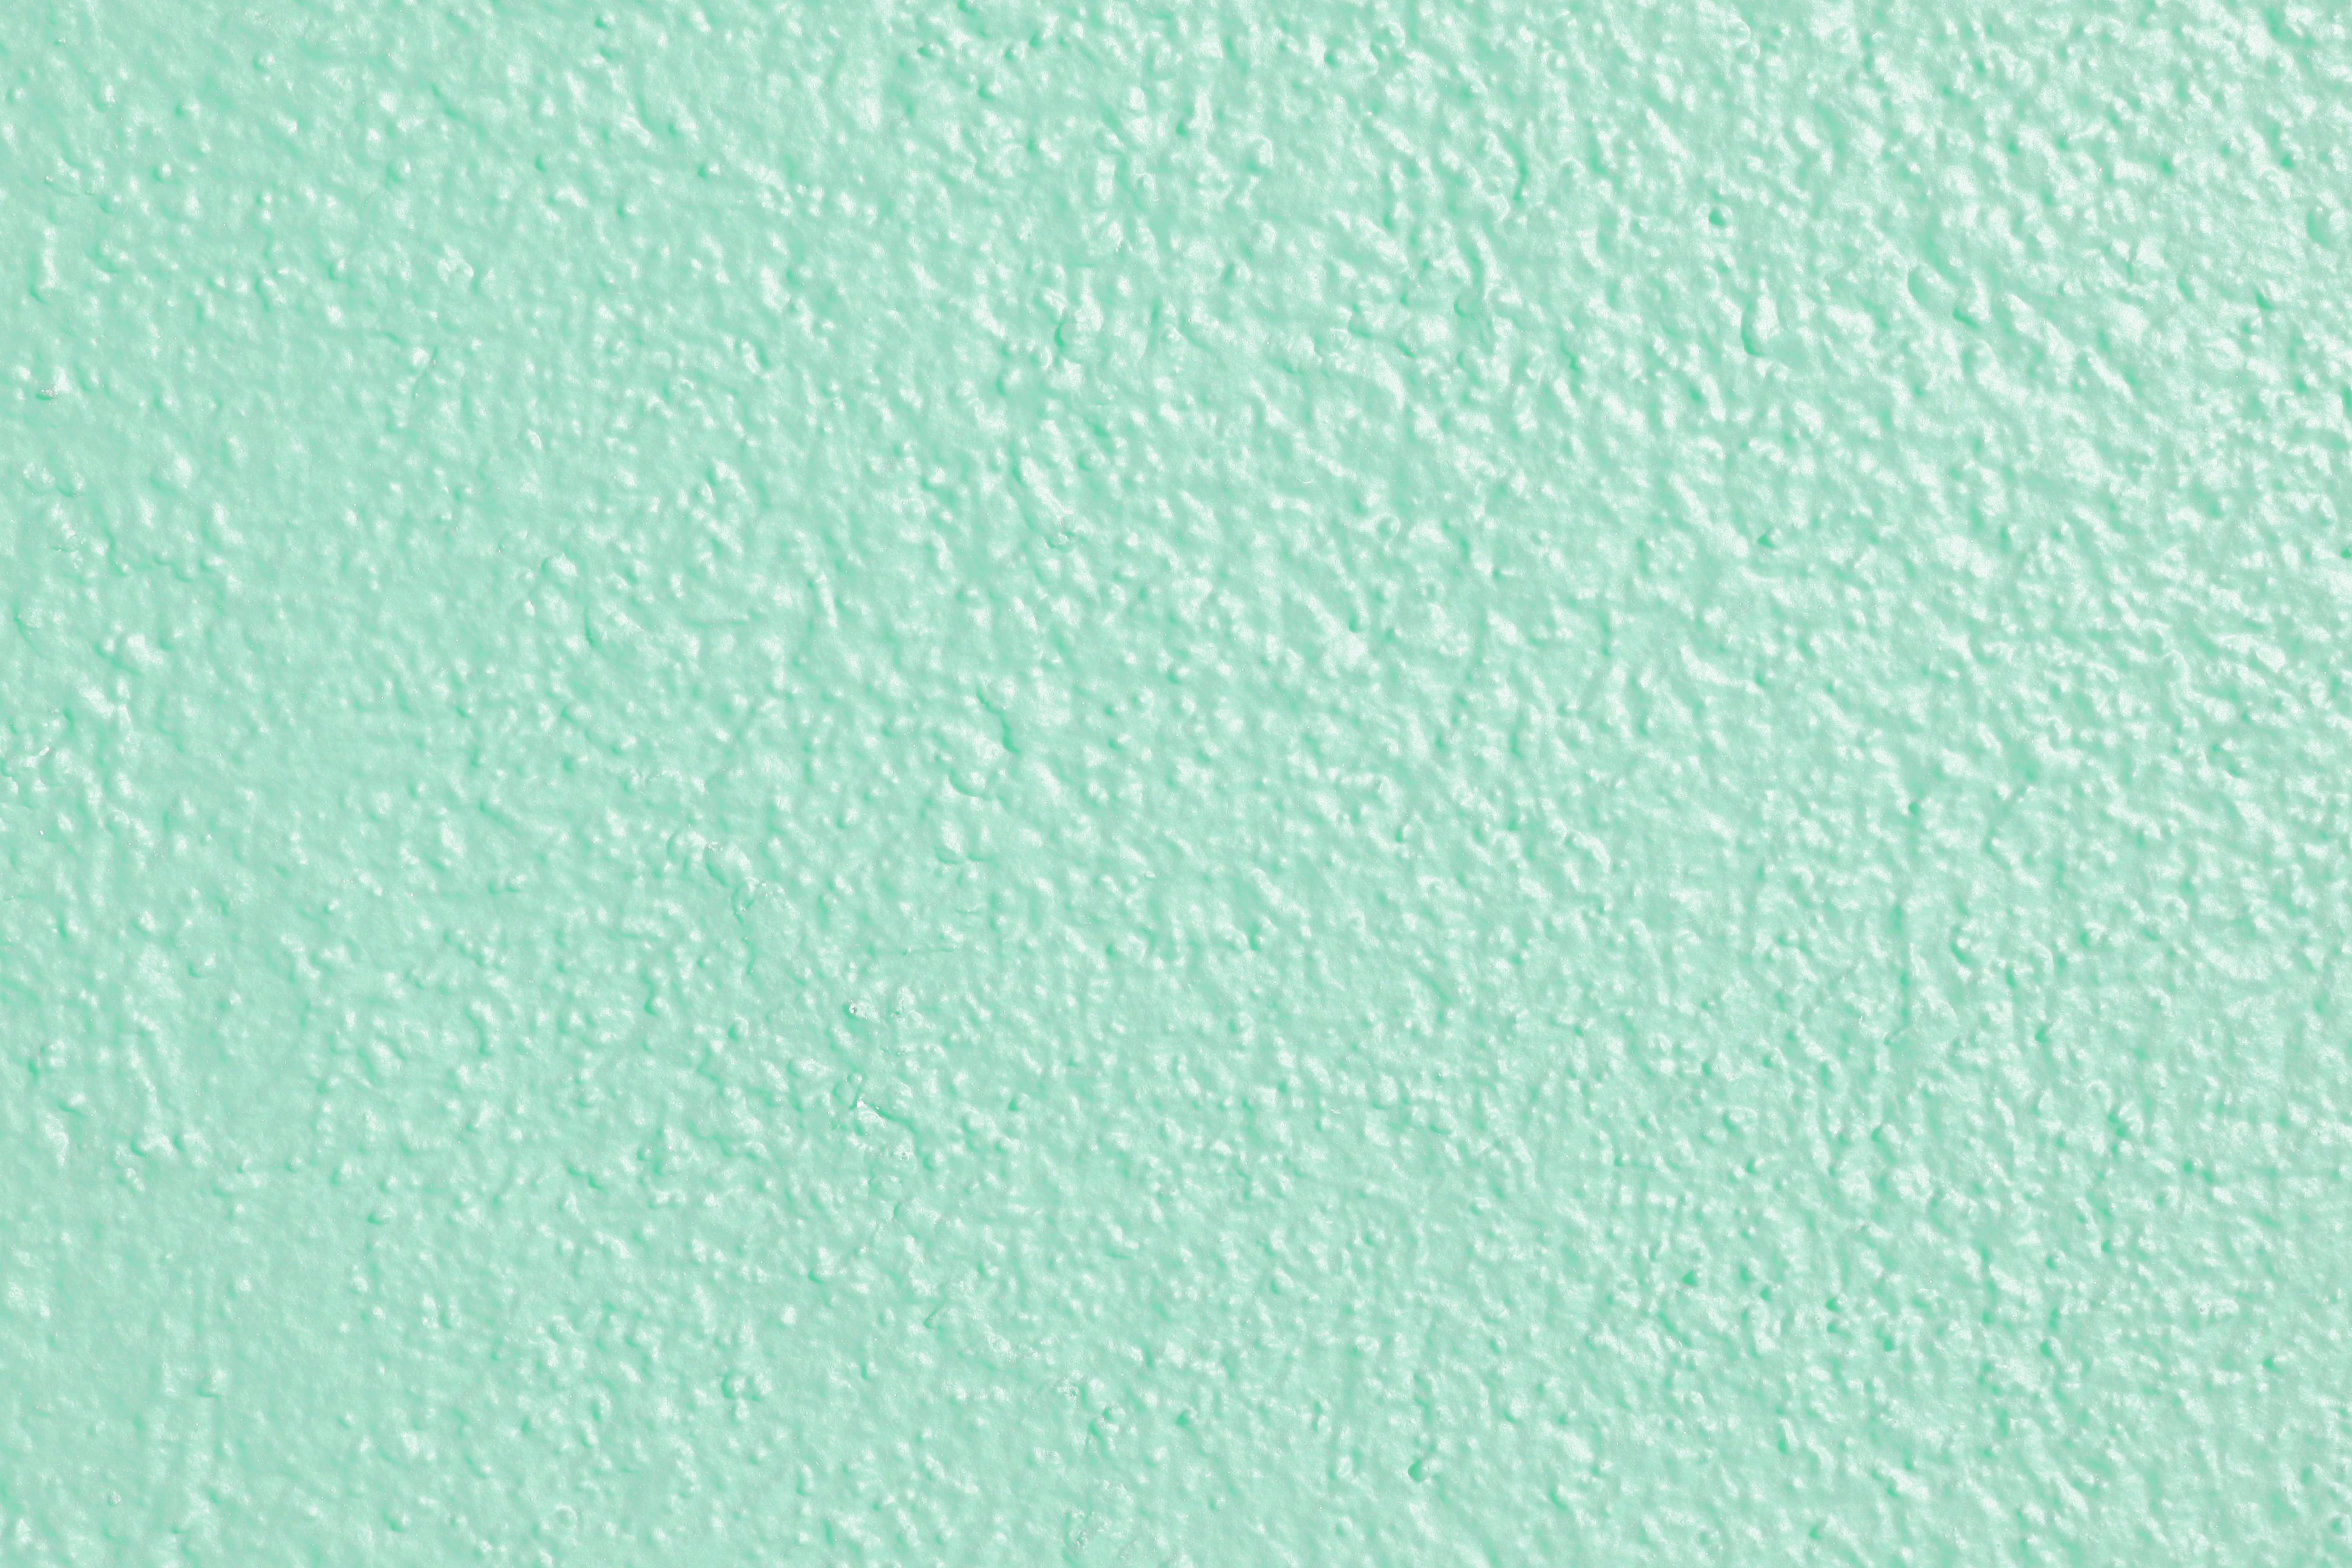 Mint Green Painted Wall Texture Picture Free Photograph Photos